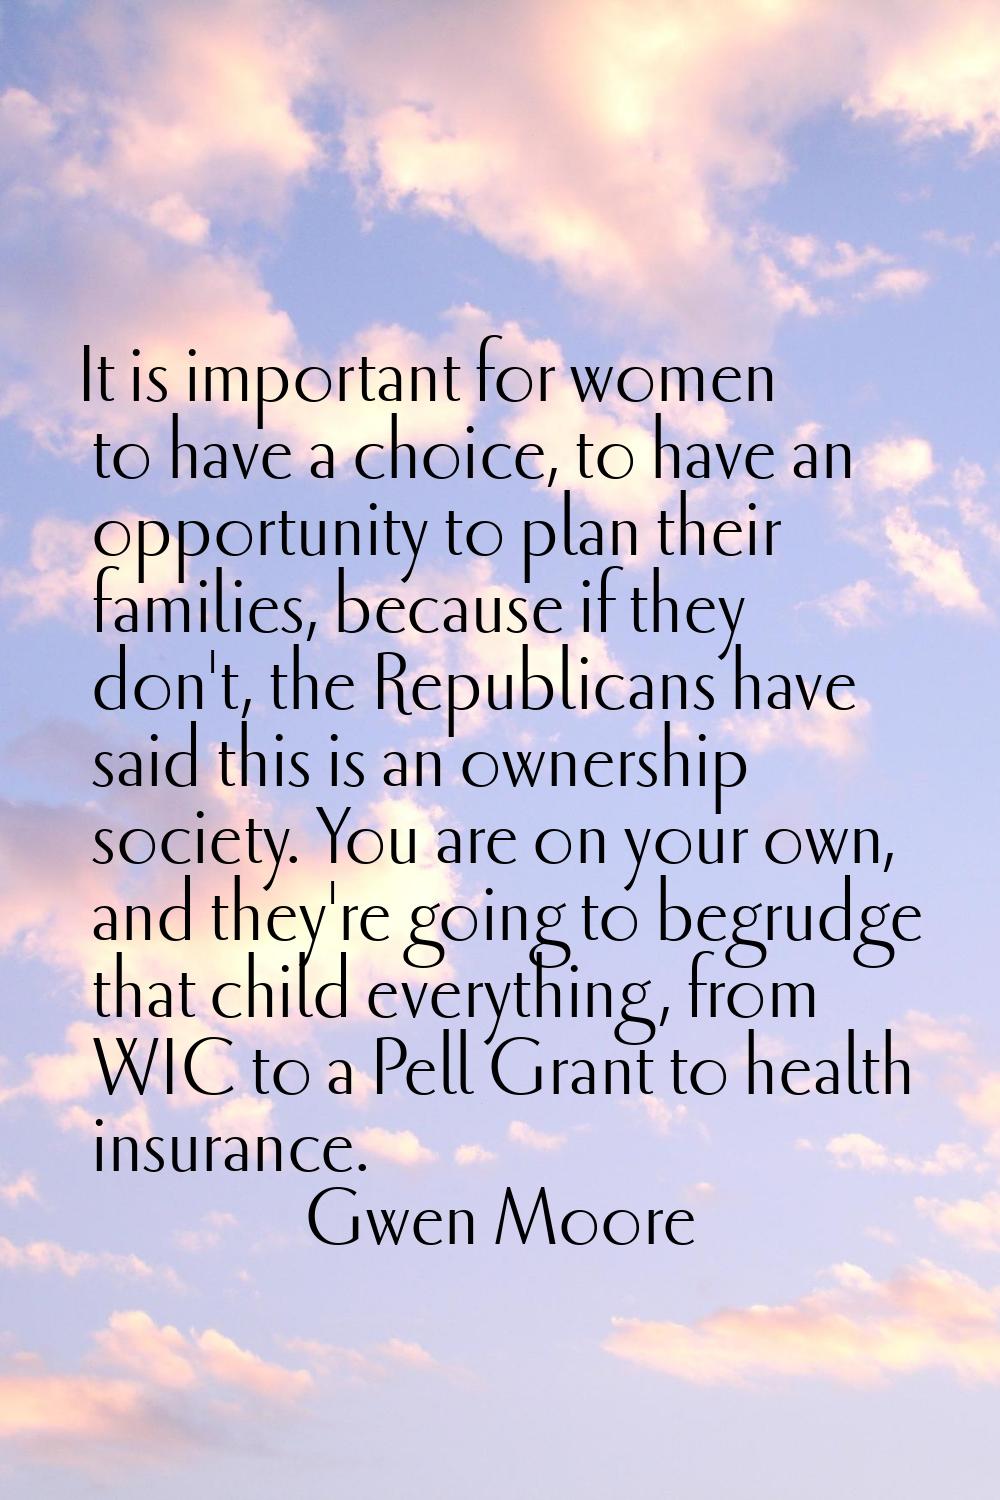 It is important for women to have a choice, to have an opportunity to plan their families, because 